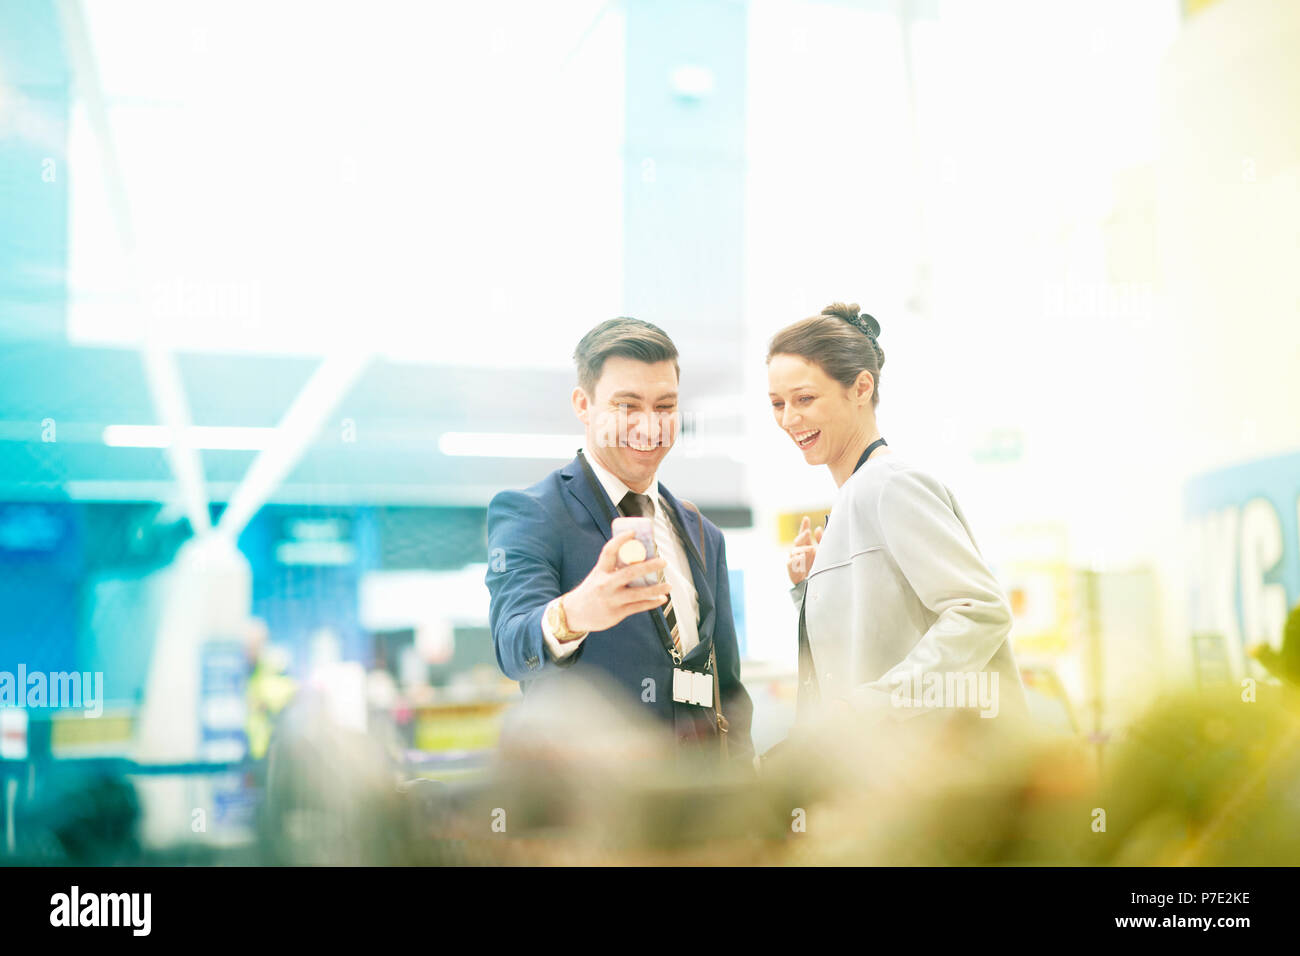 Businessman and businesswoman standing together, looking at smartphone, laughing Stock Photo